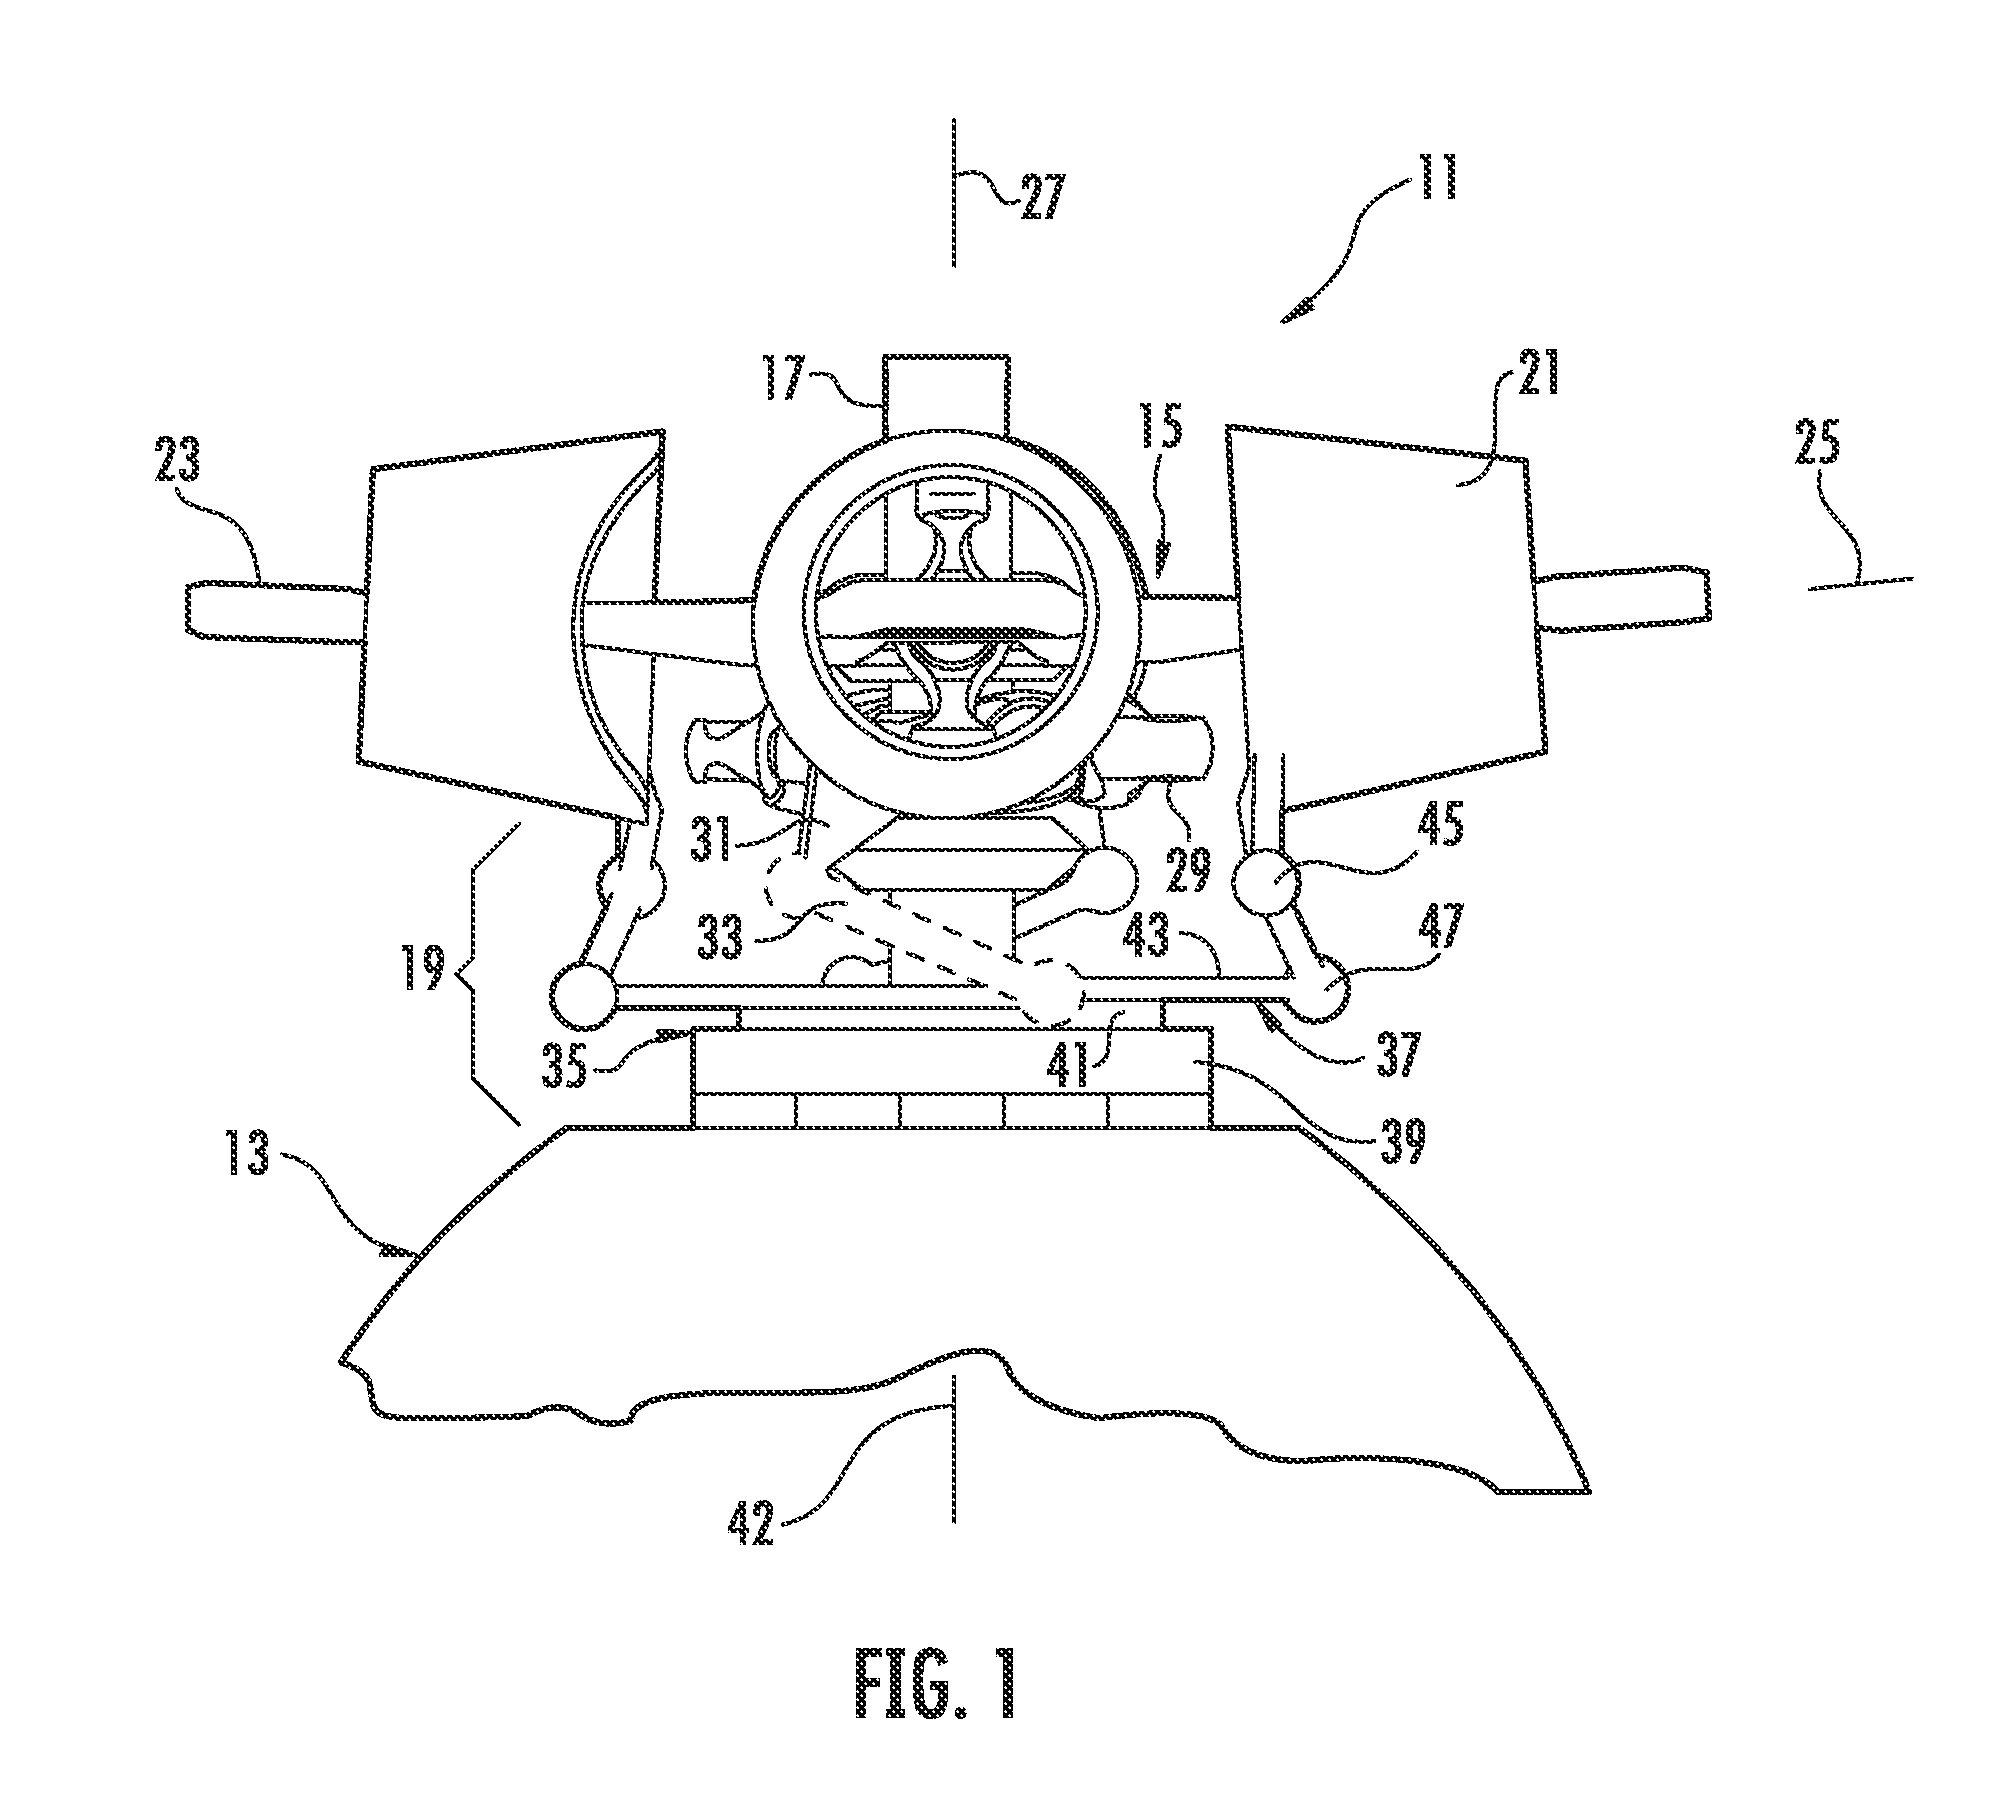 Improved Rotor-Blade Control System and Method